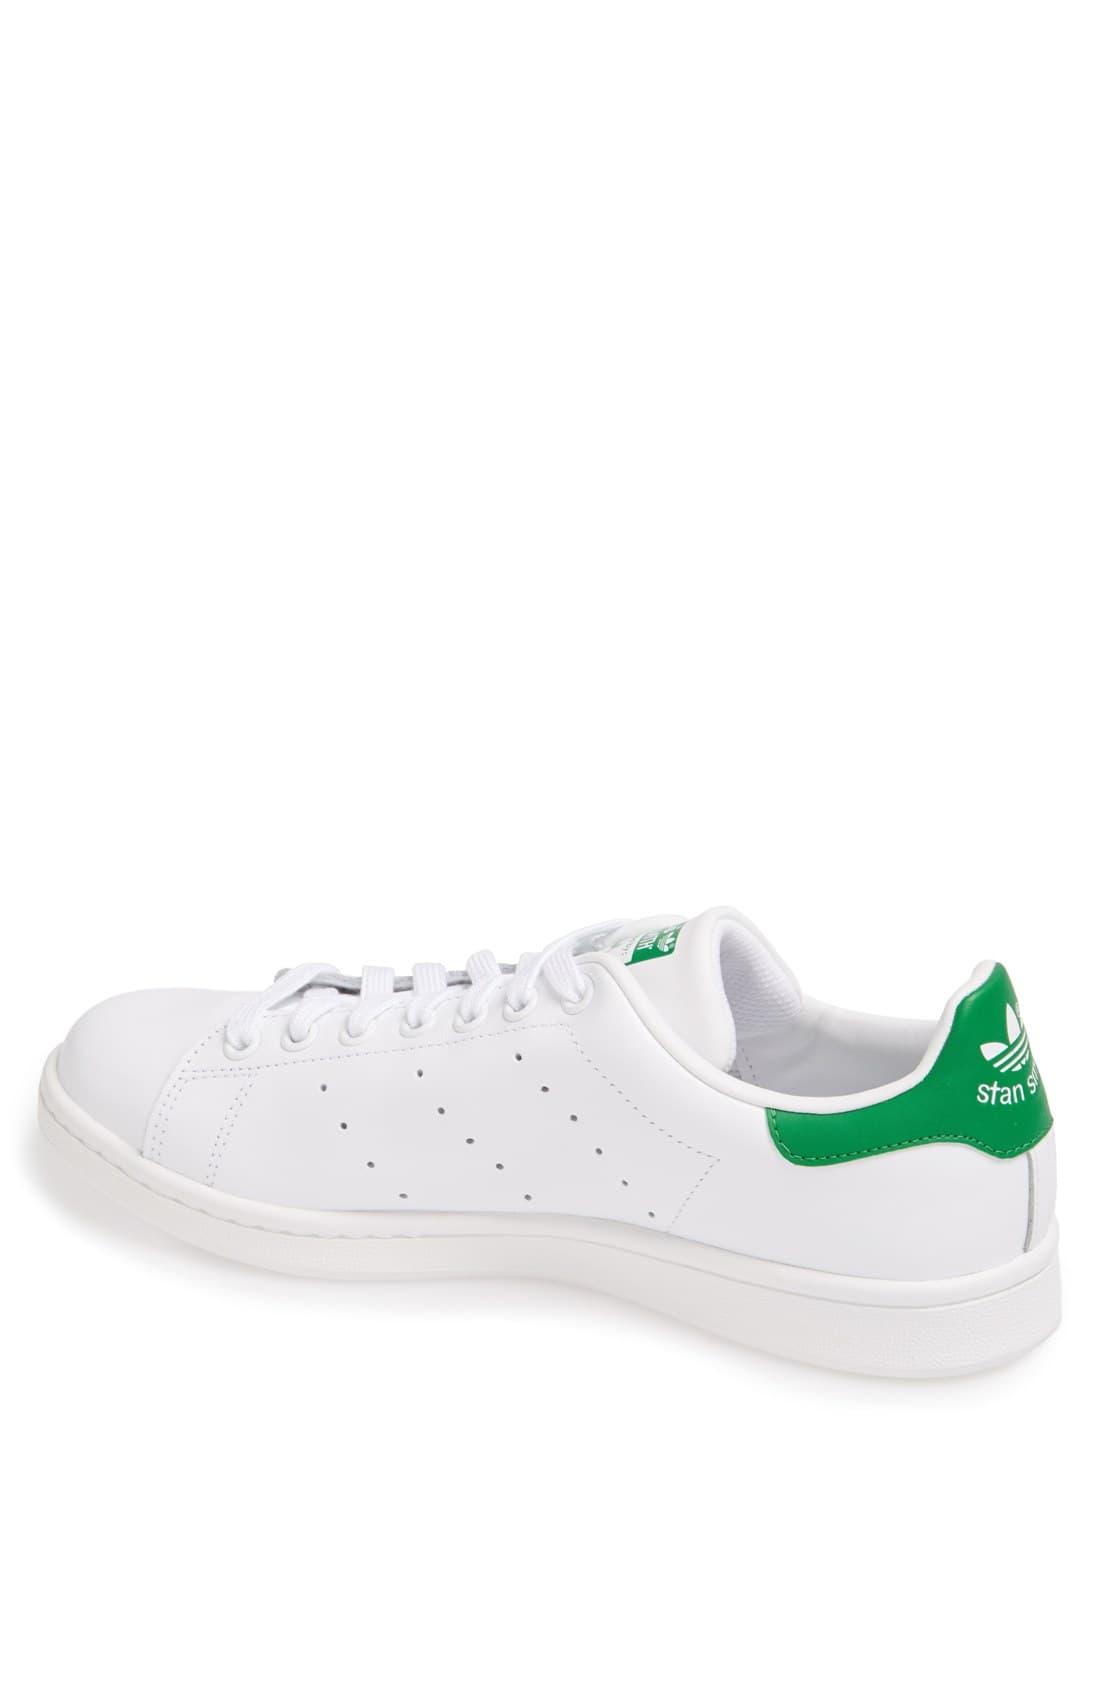 adidas Stan Smith Sneaker in White - Lyst